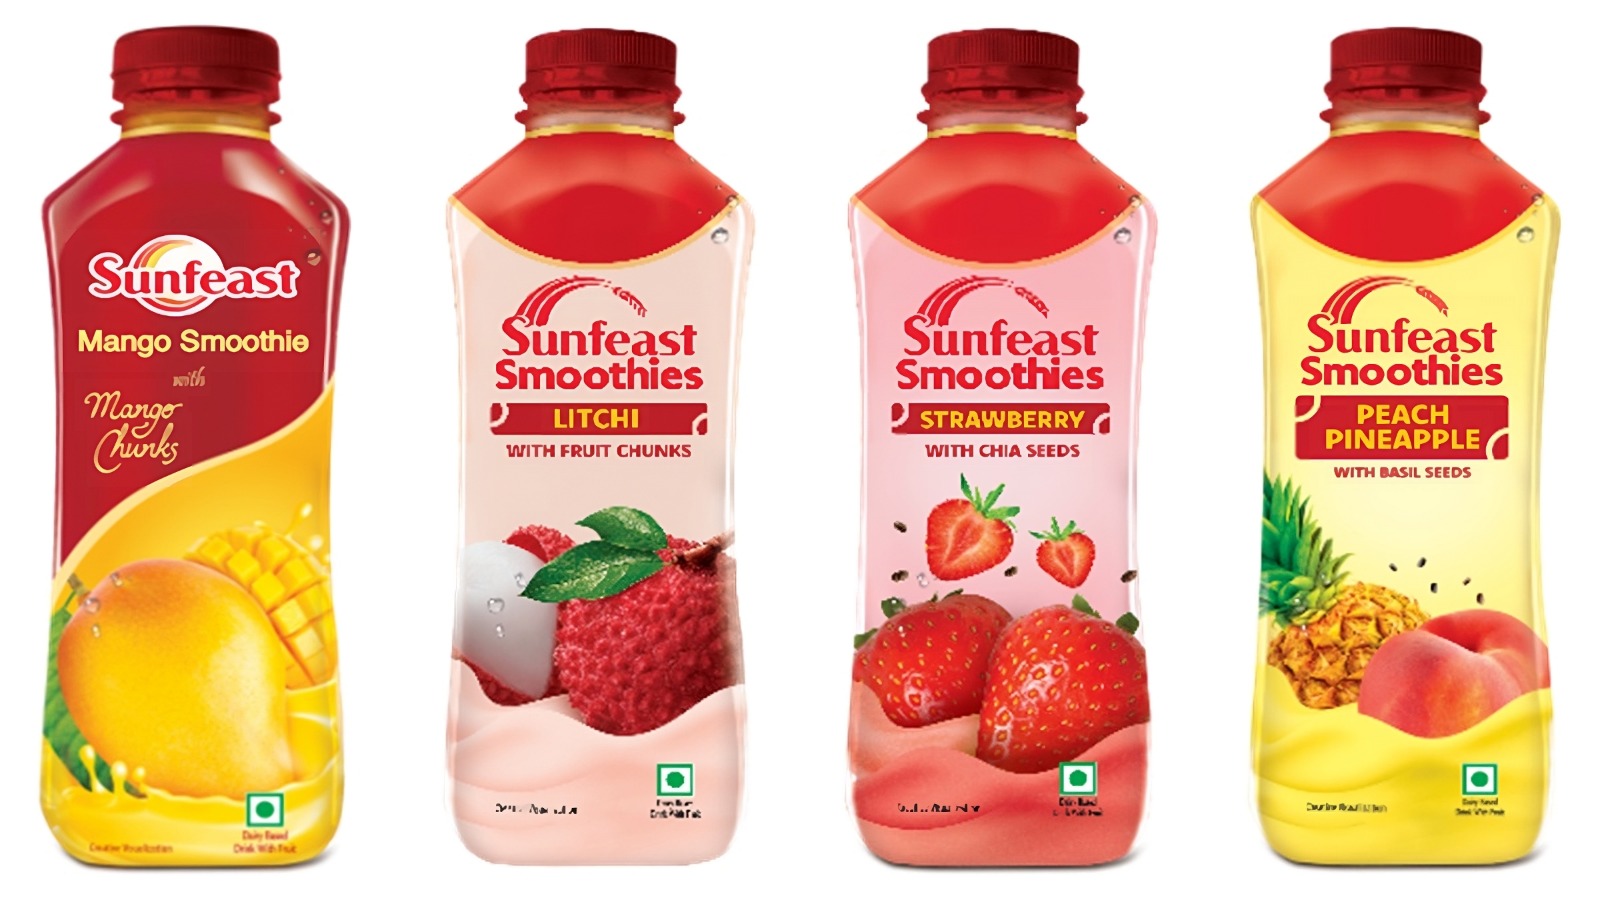 Sunfeast smoothies